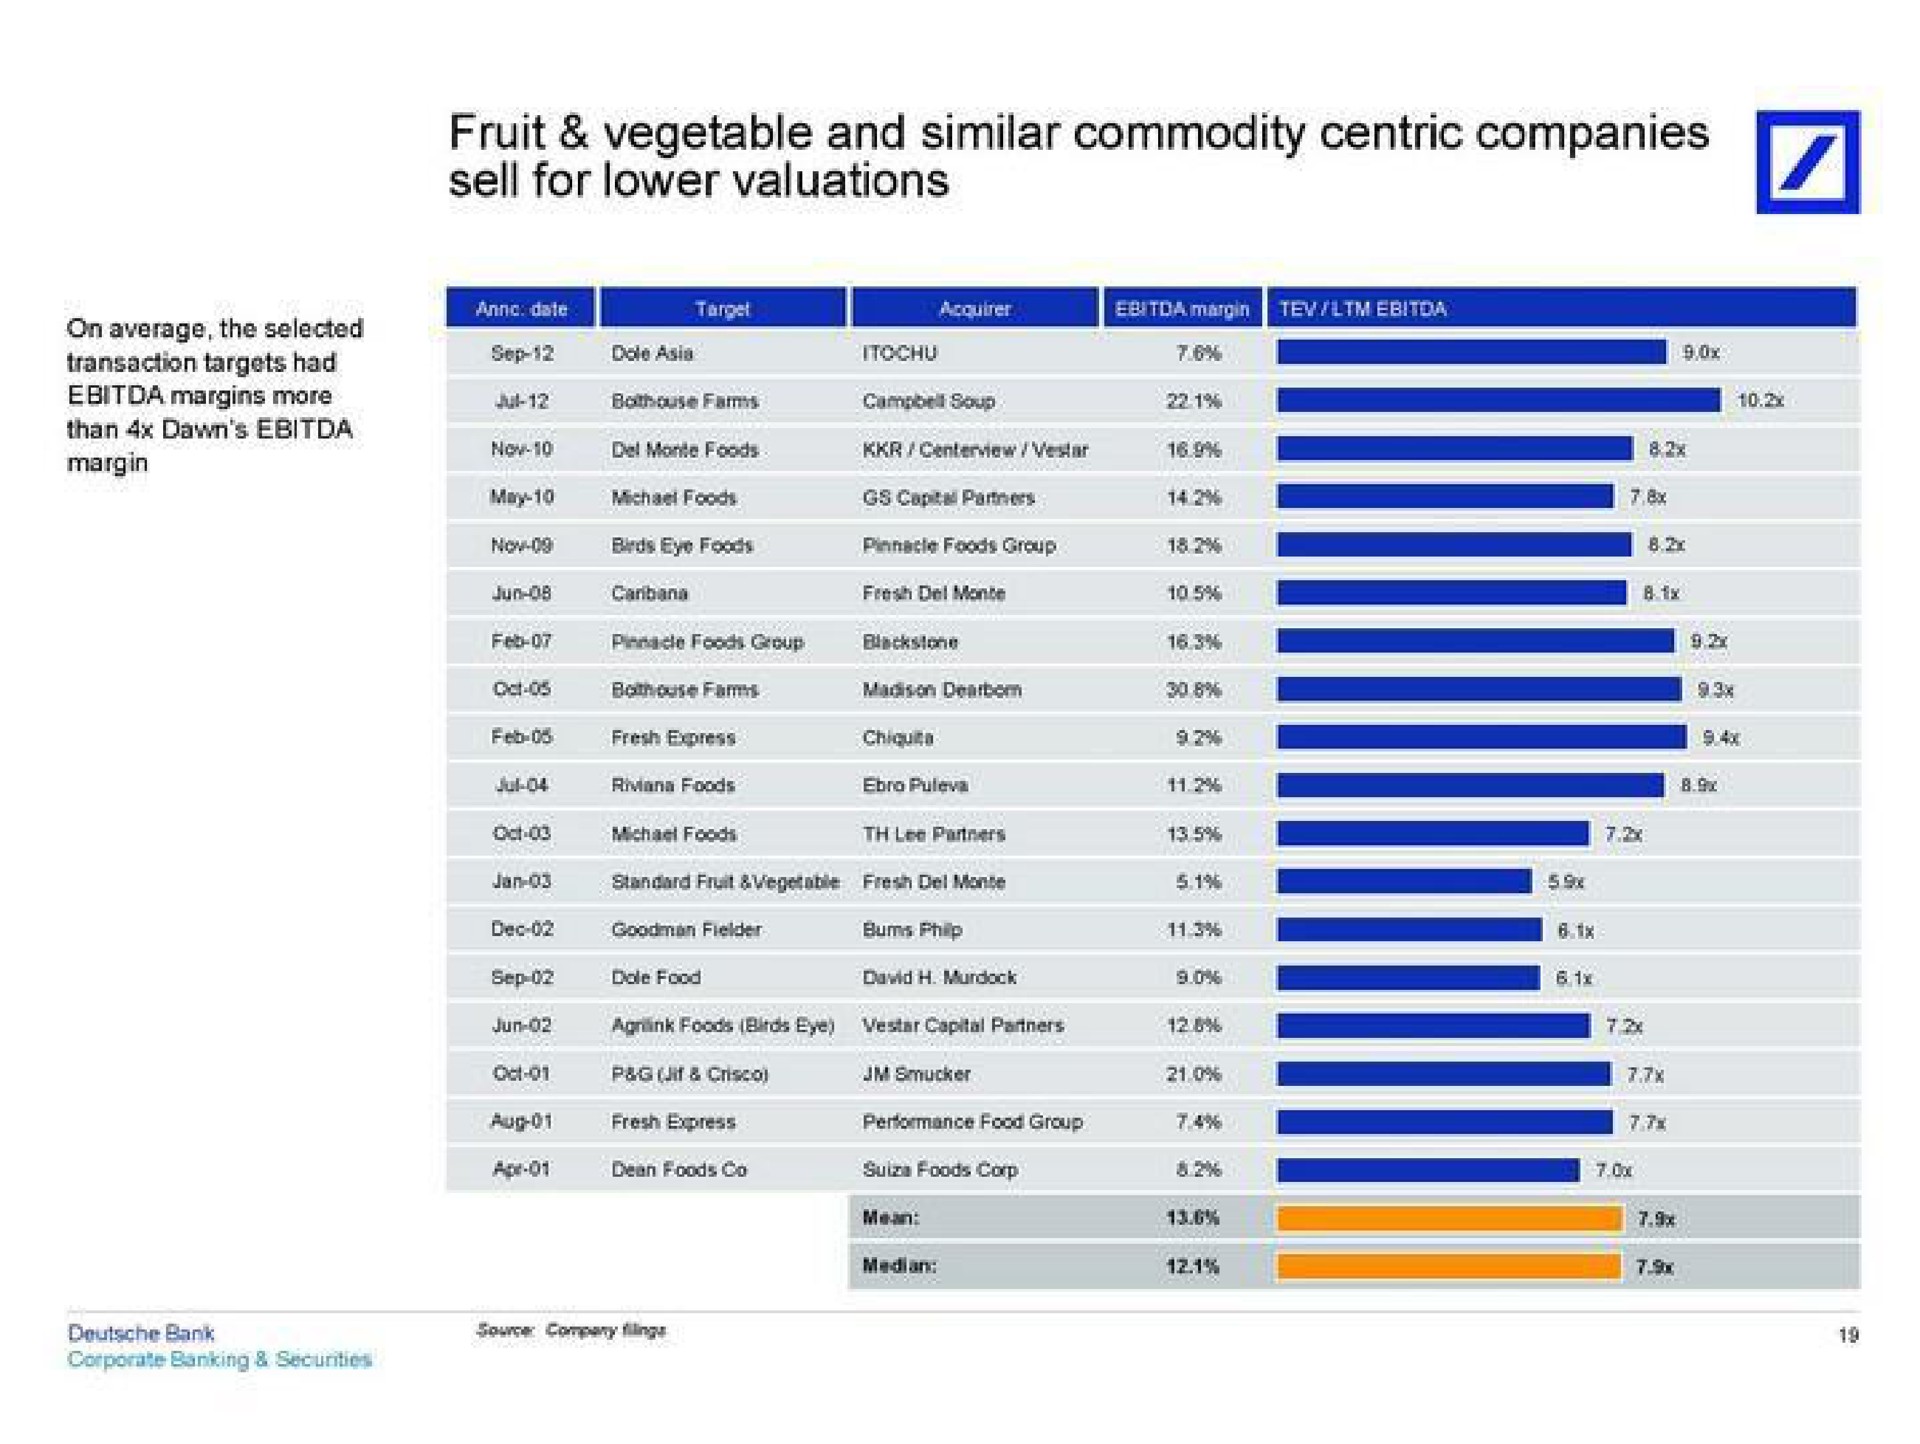 fruit vegetable and similar commodity centric companies | Deutsche Bank